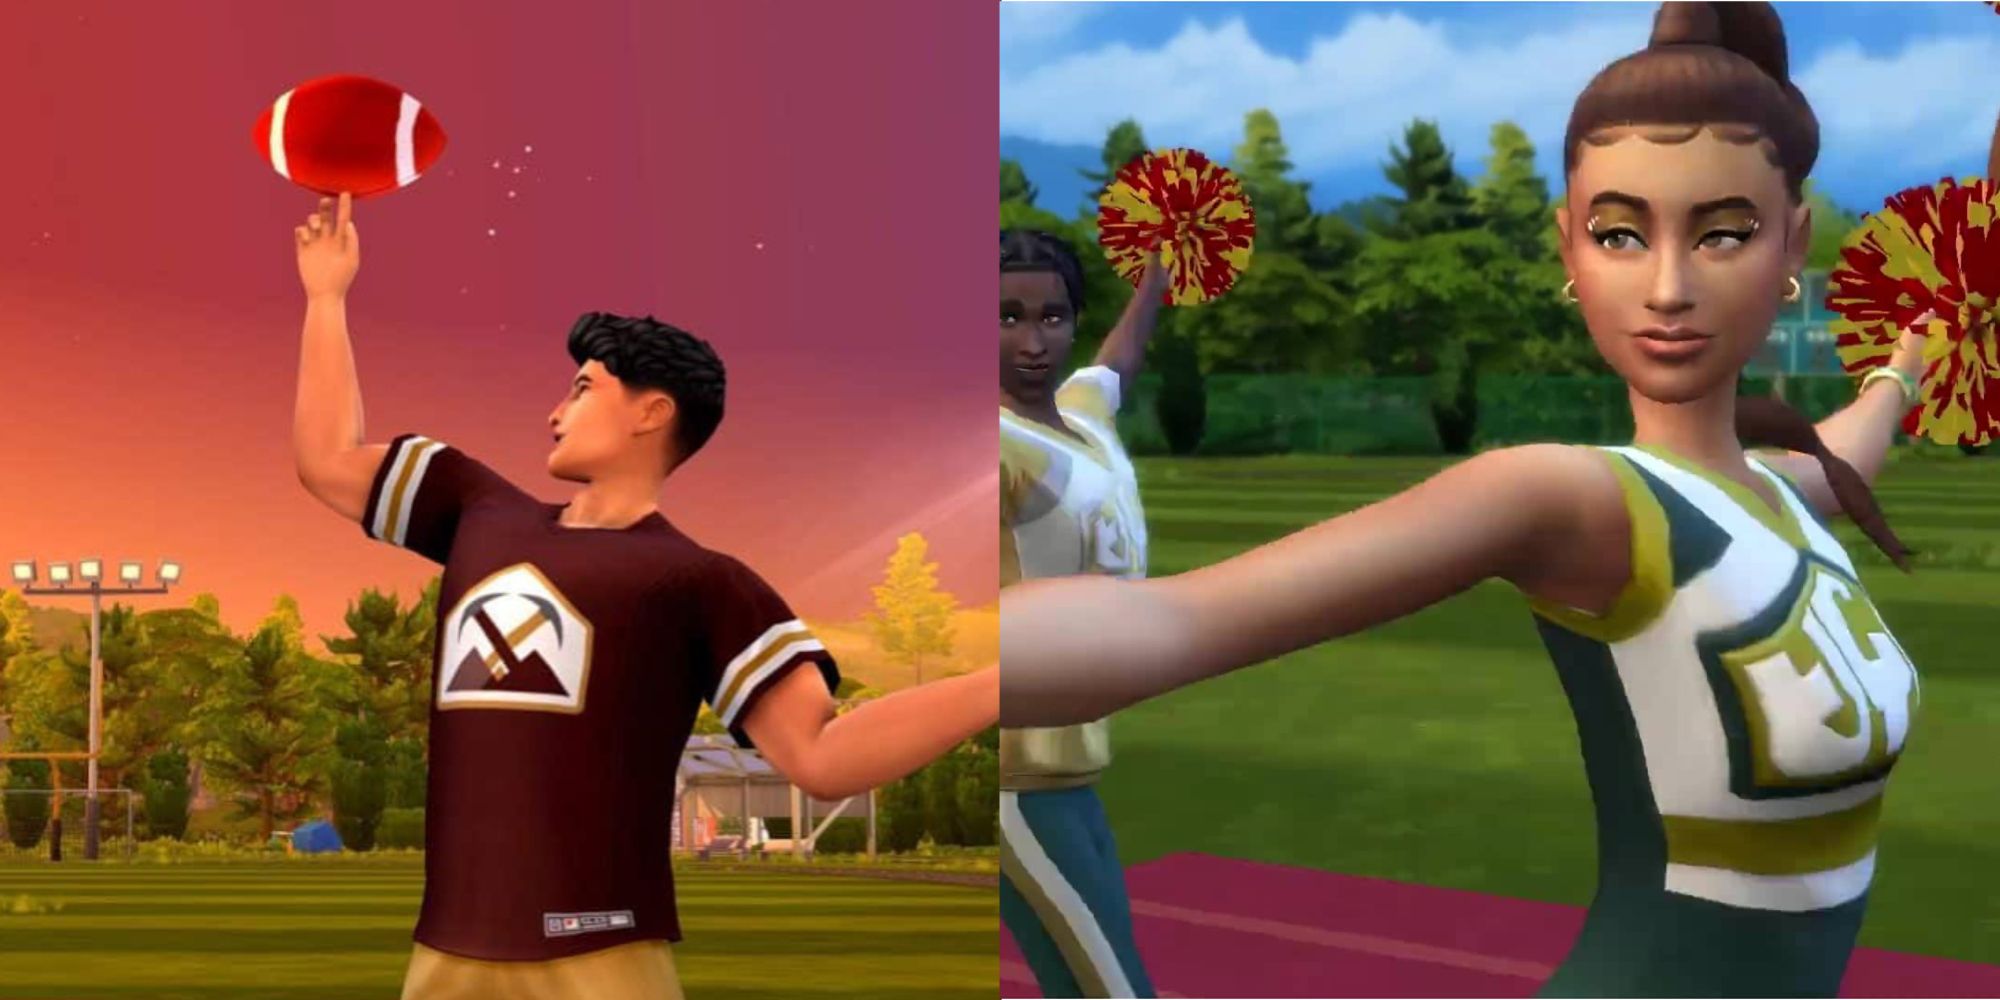 Football and Cheerleading in The Sims 4